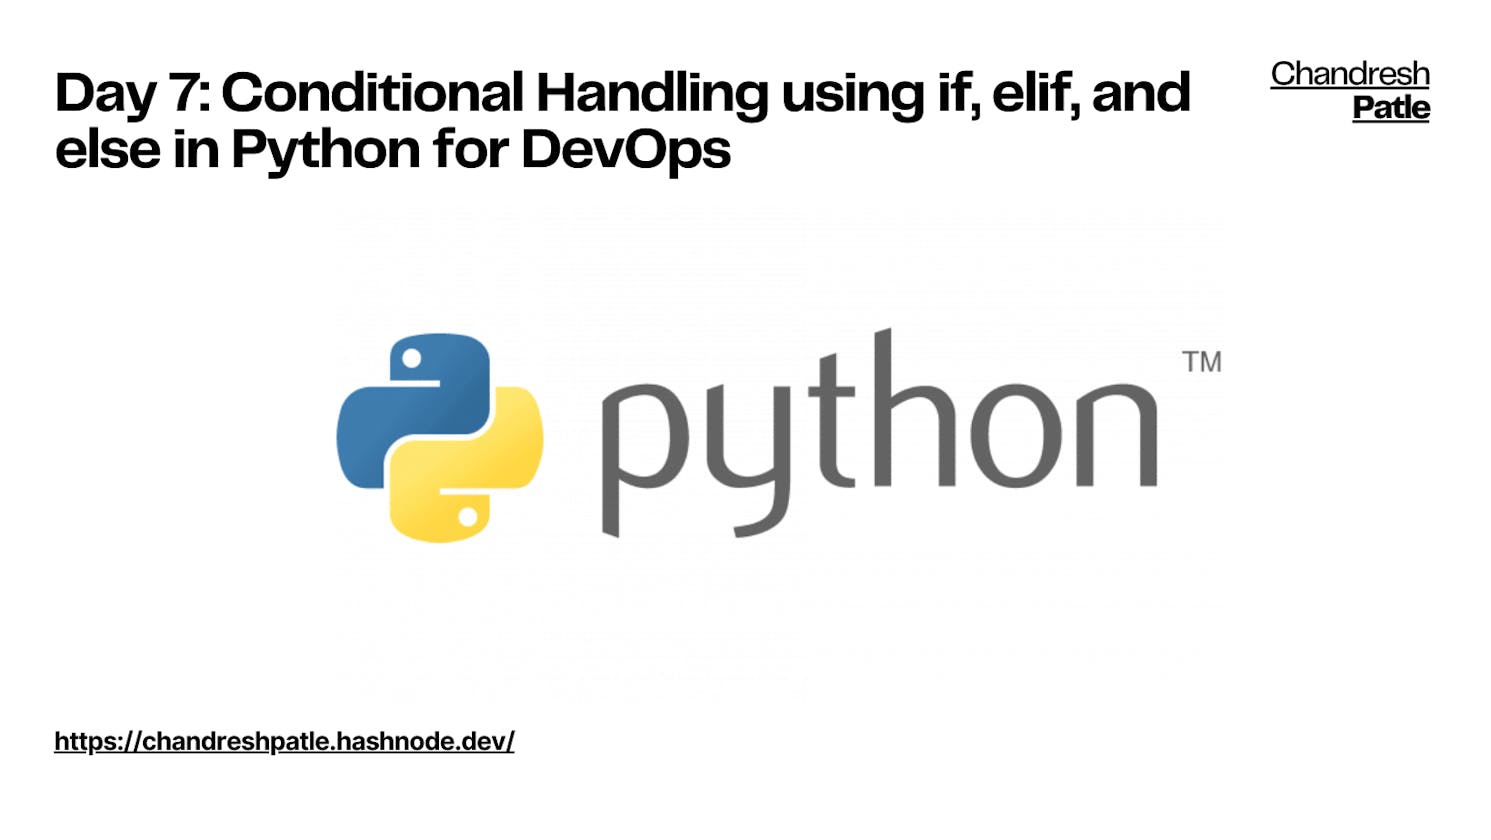 Day 7: Conditional Handling using if, elif, and else in Python for DevOps